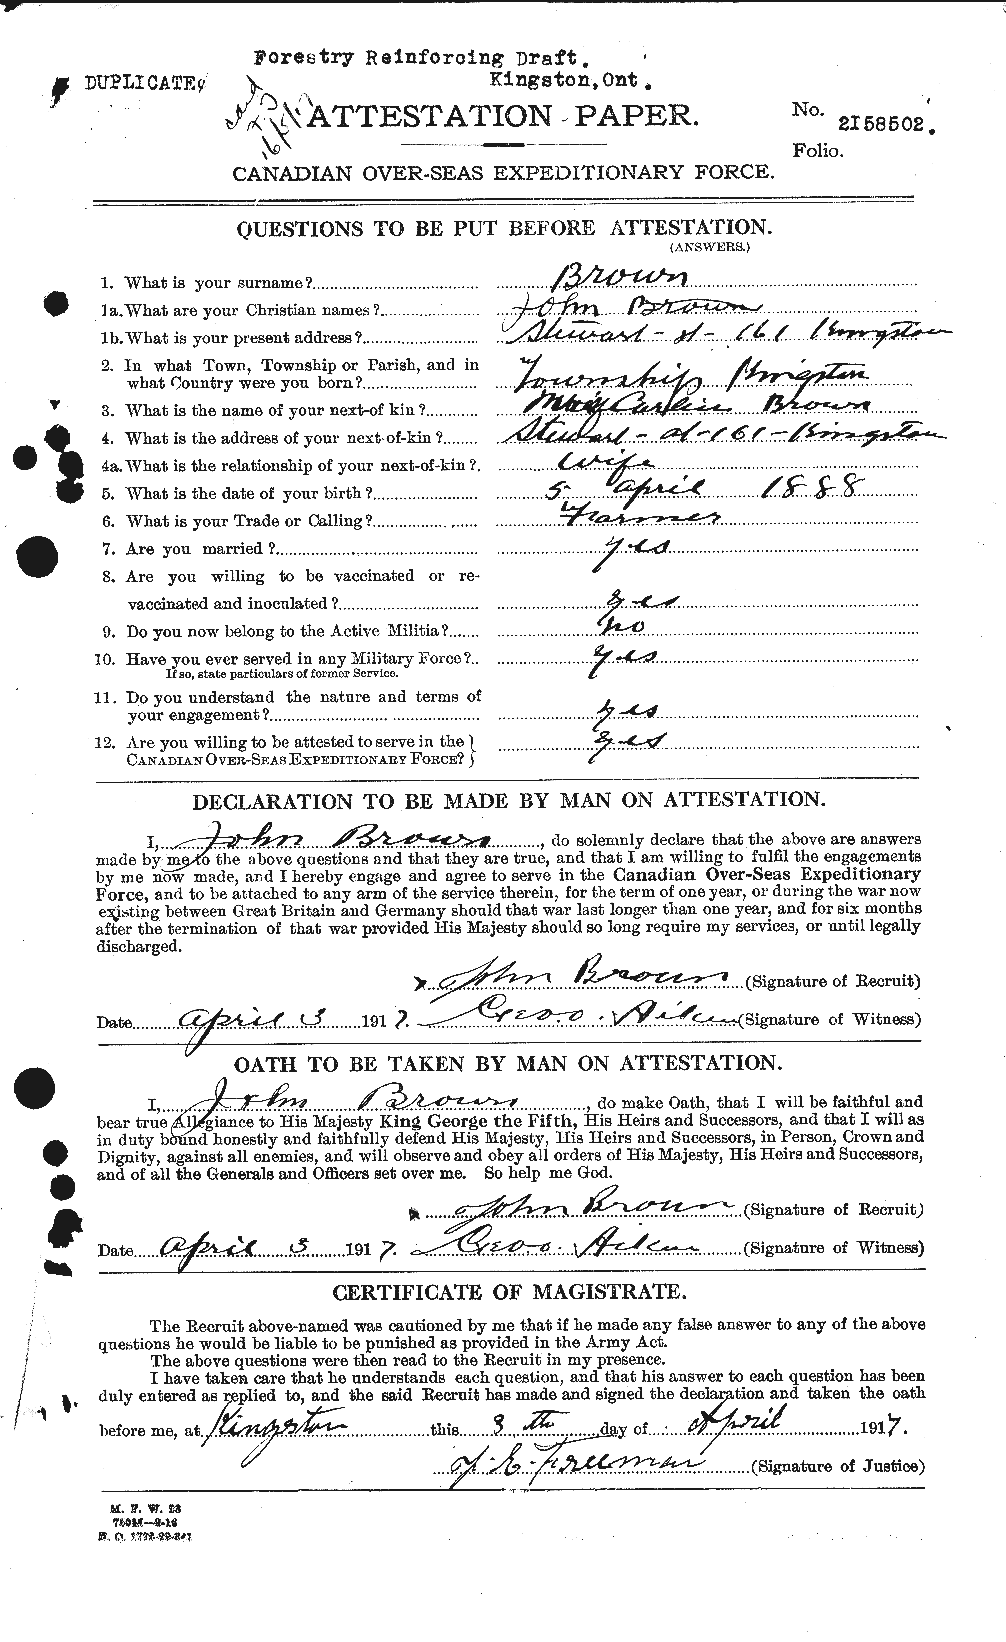 Personnel Records of the First World War - CEF 263903a